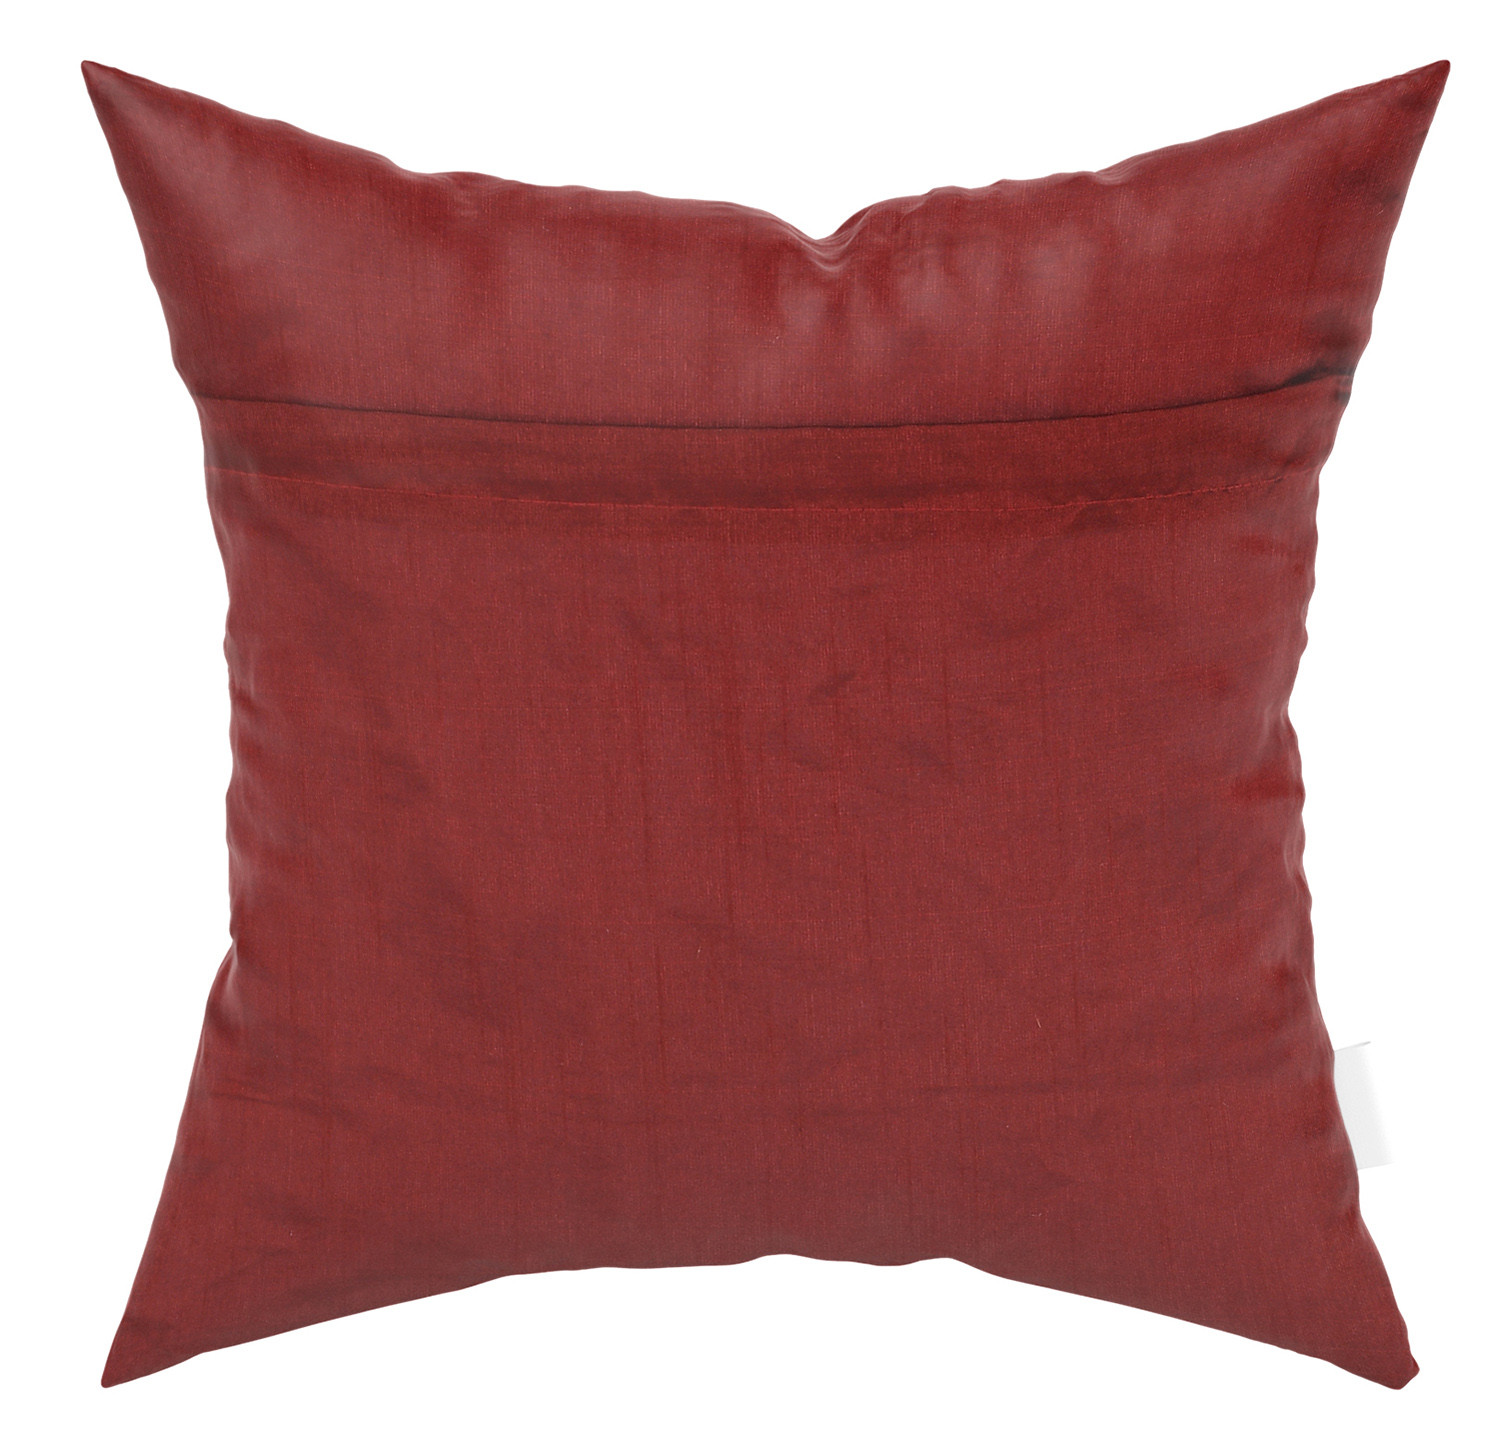 Kuber Industries Rangoli Print Soft Decorative Square Cushion Cover, Cushion Case For Sofa Couch Bed 16x16 Inch-(Maroon)